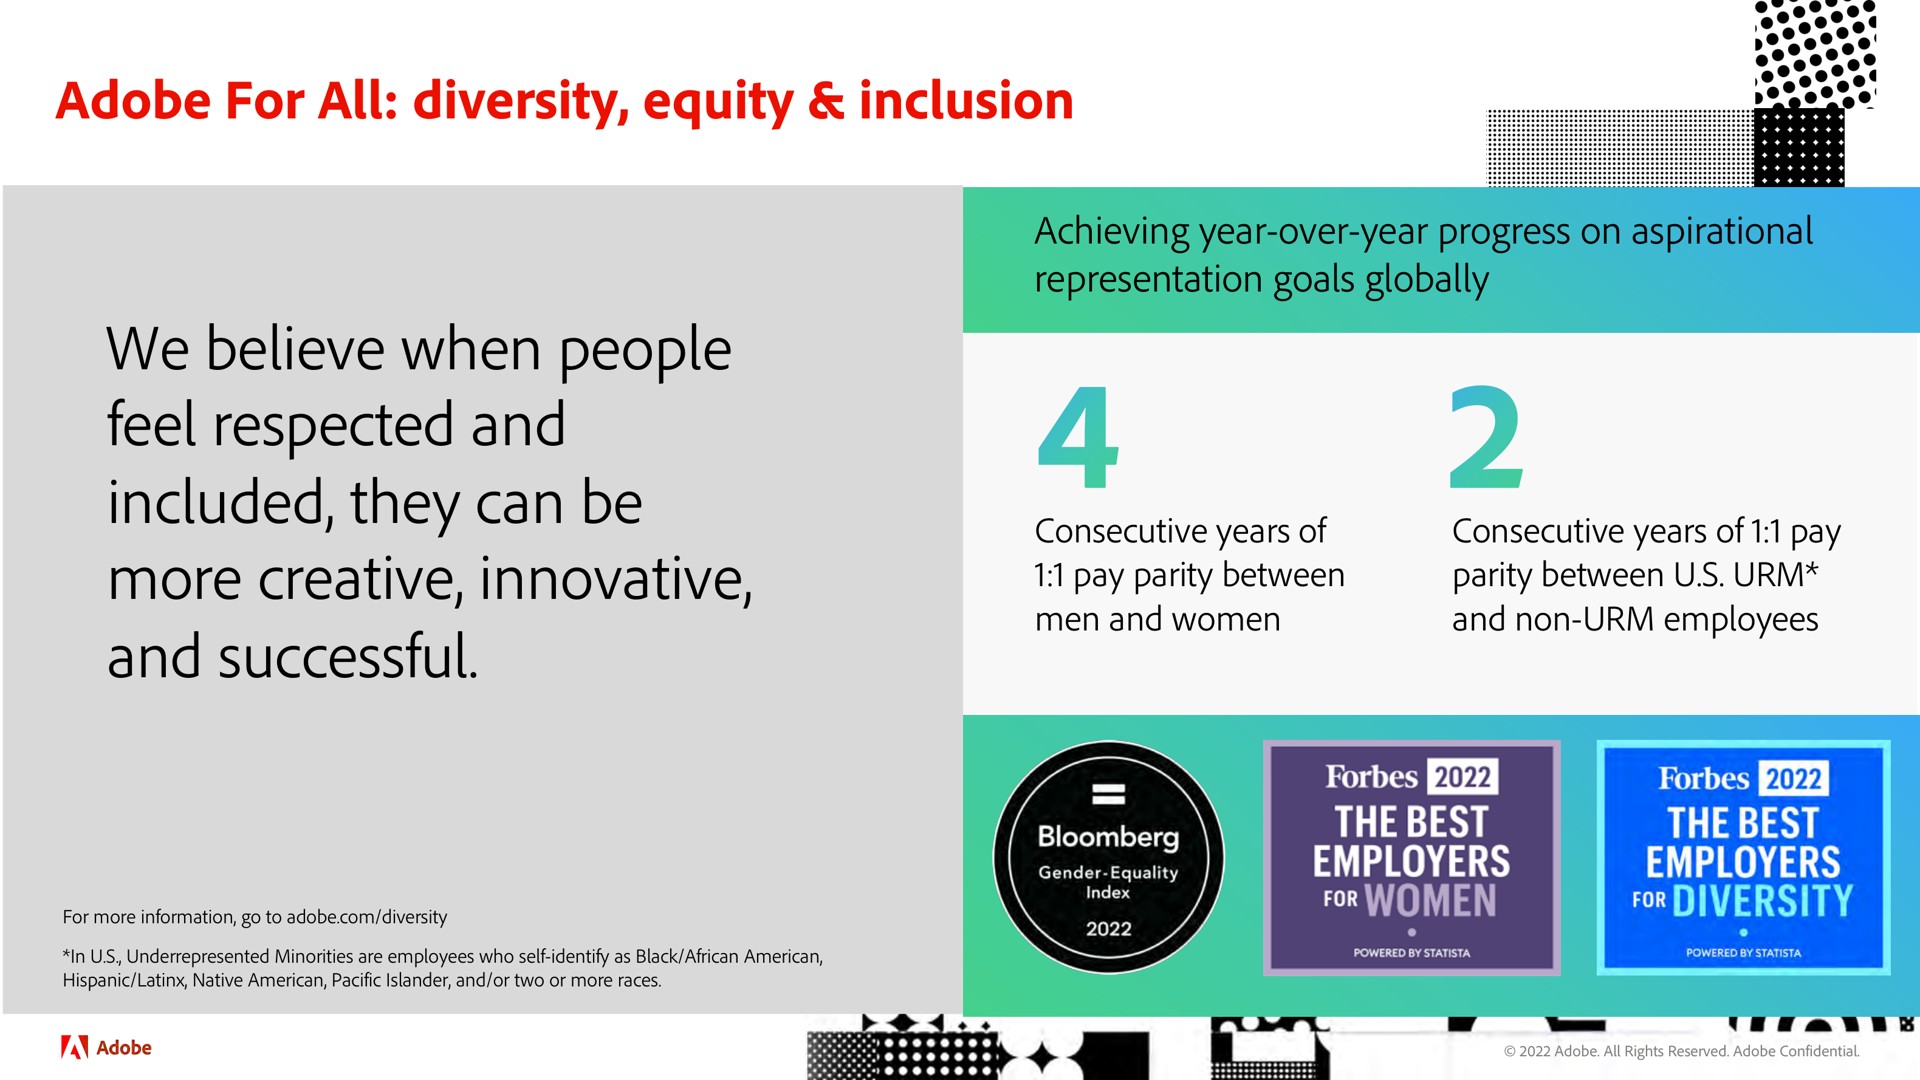 adobe for all diversity equity inclusion we believe when people feel respected and included they can be more creative innovative and successful | Adobe